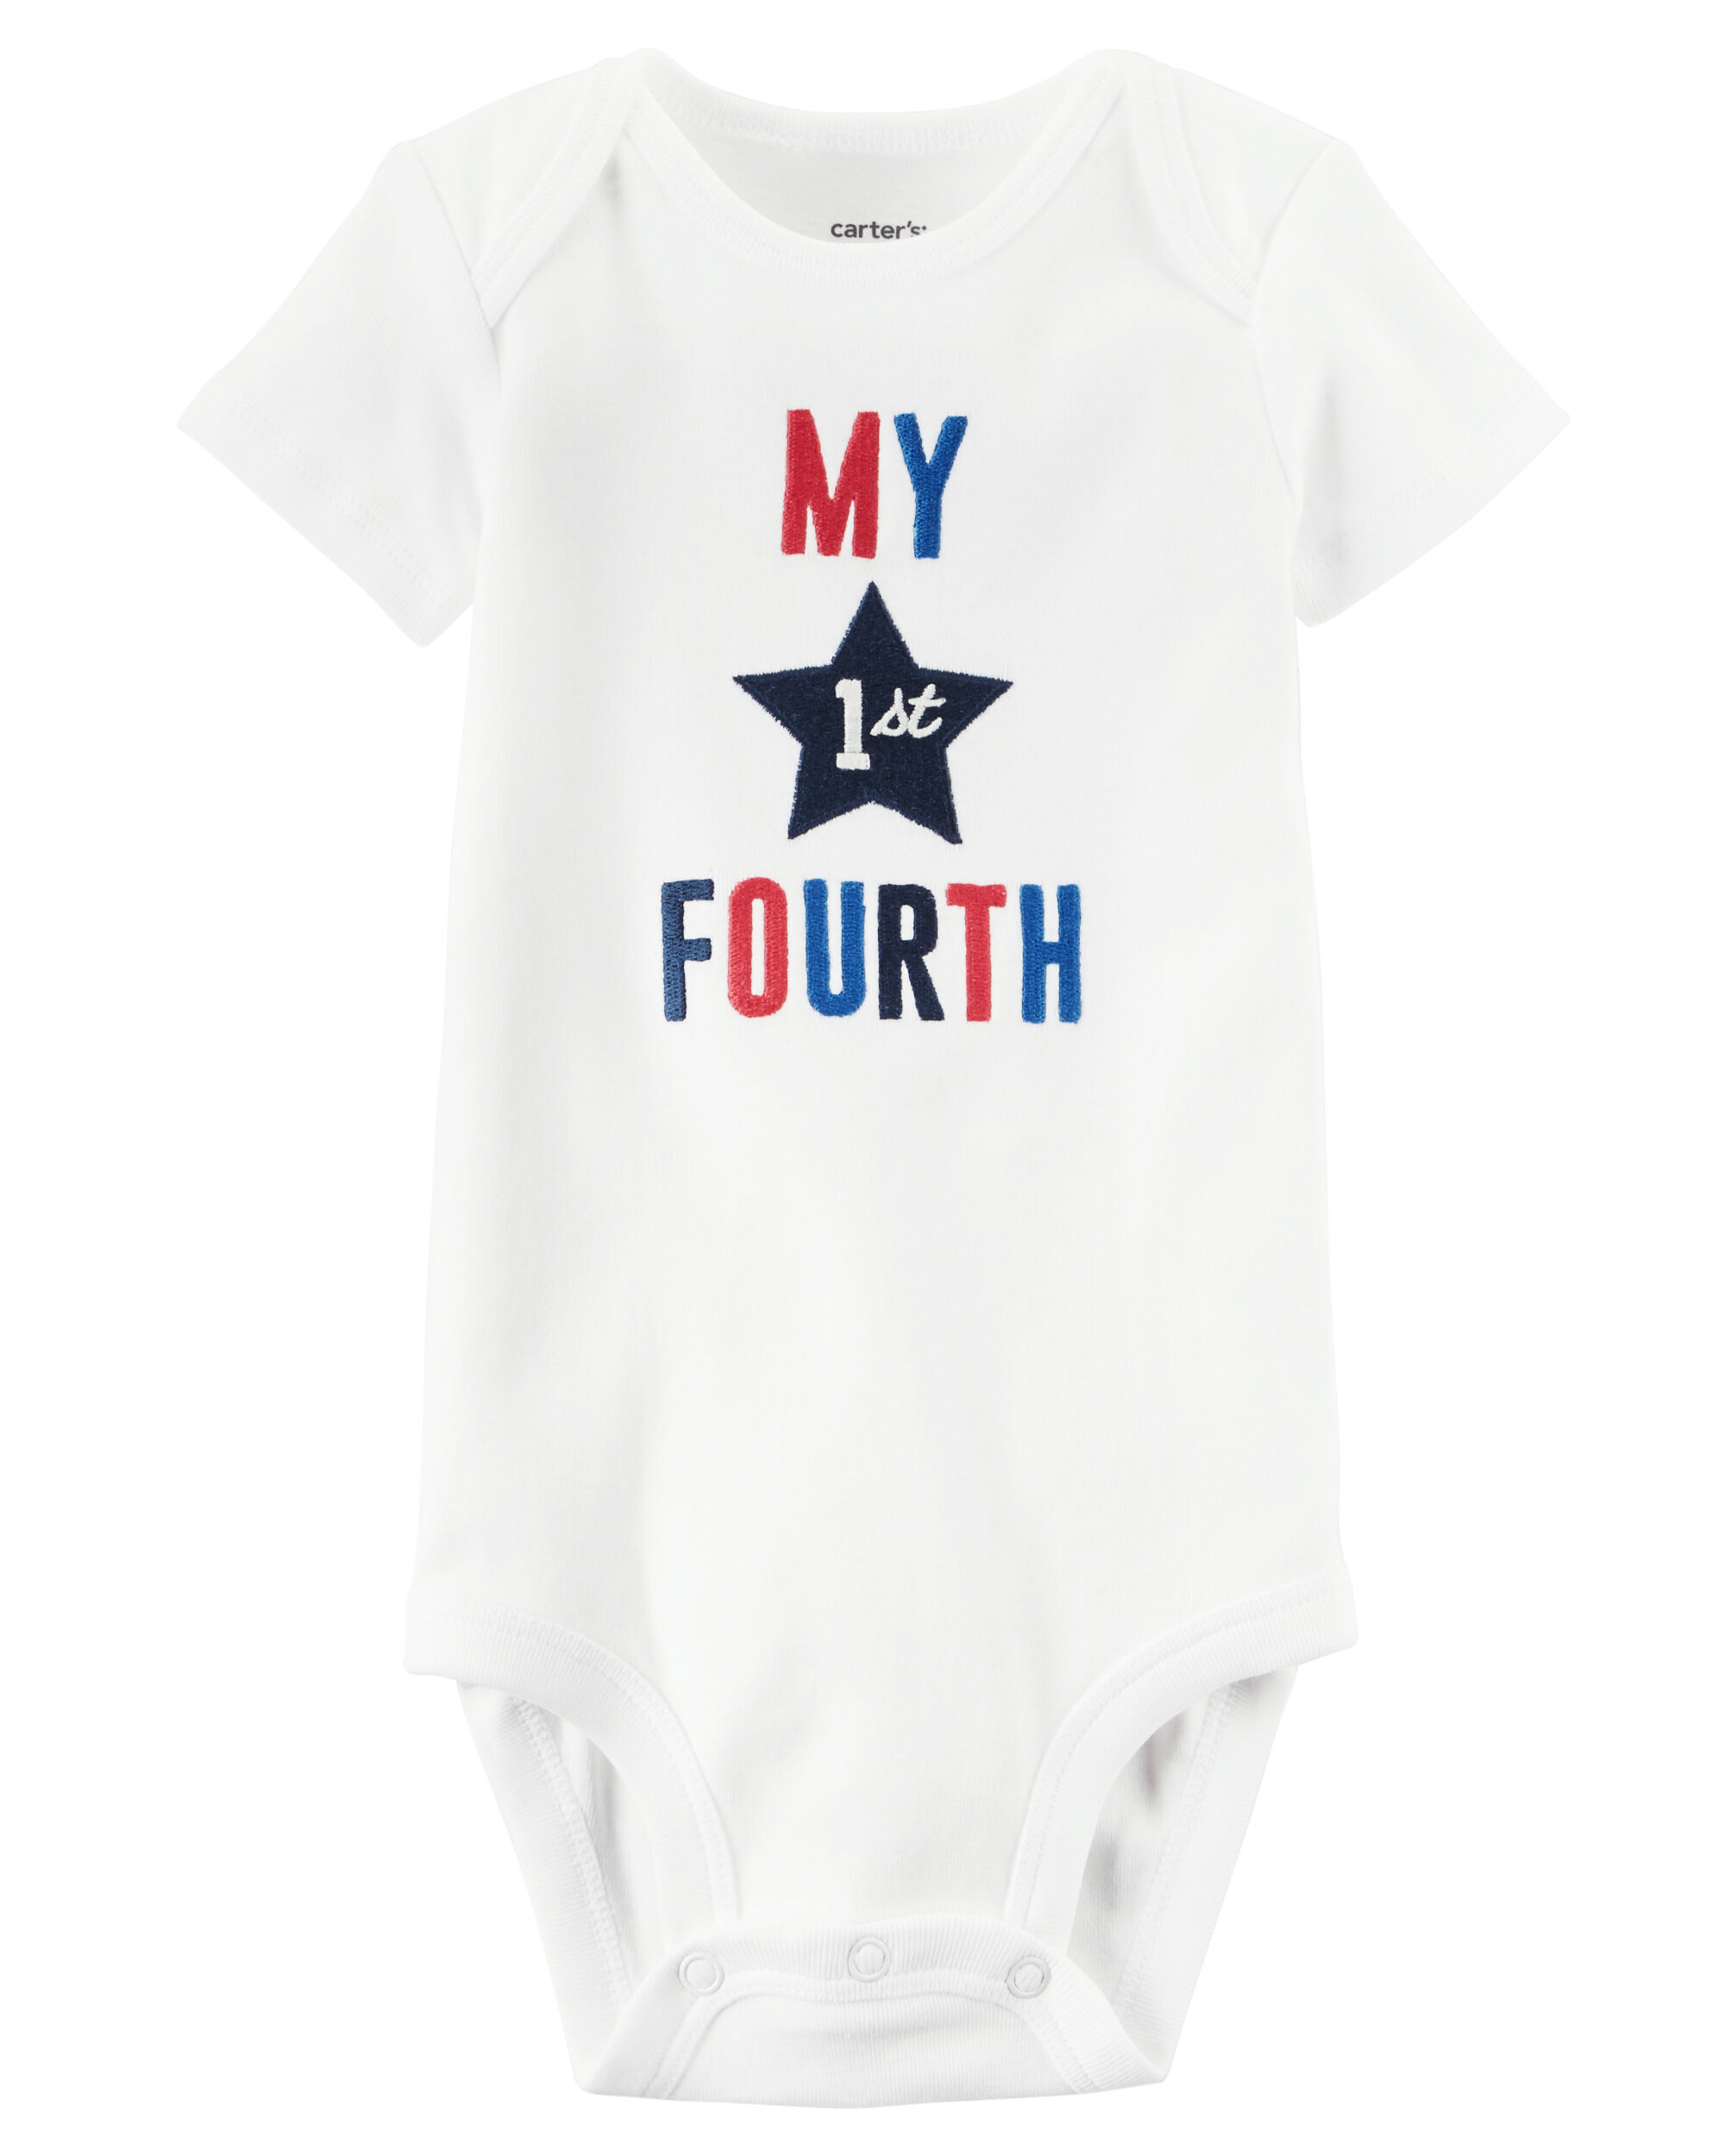 baby's first fourth of july outfit